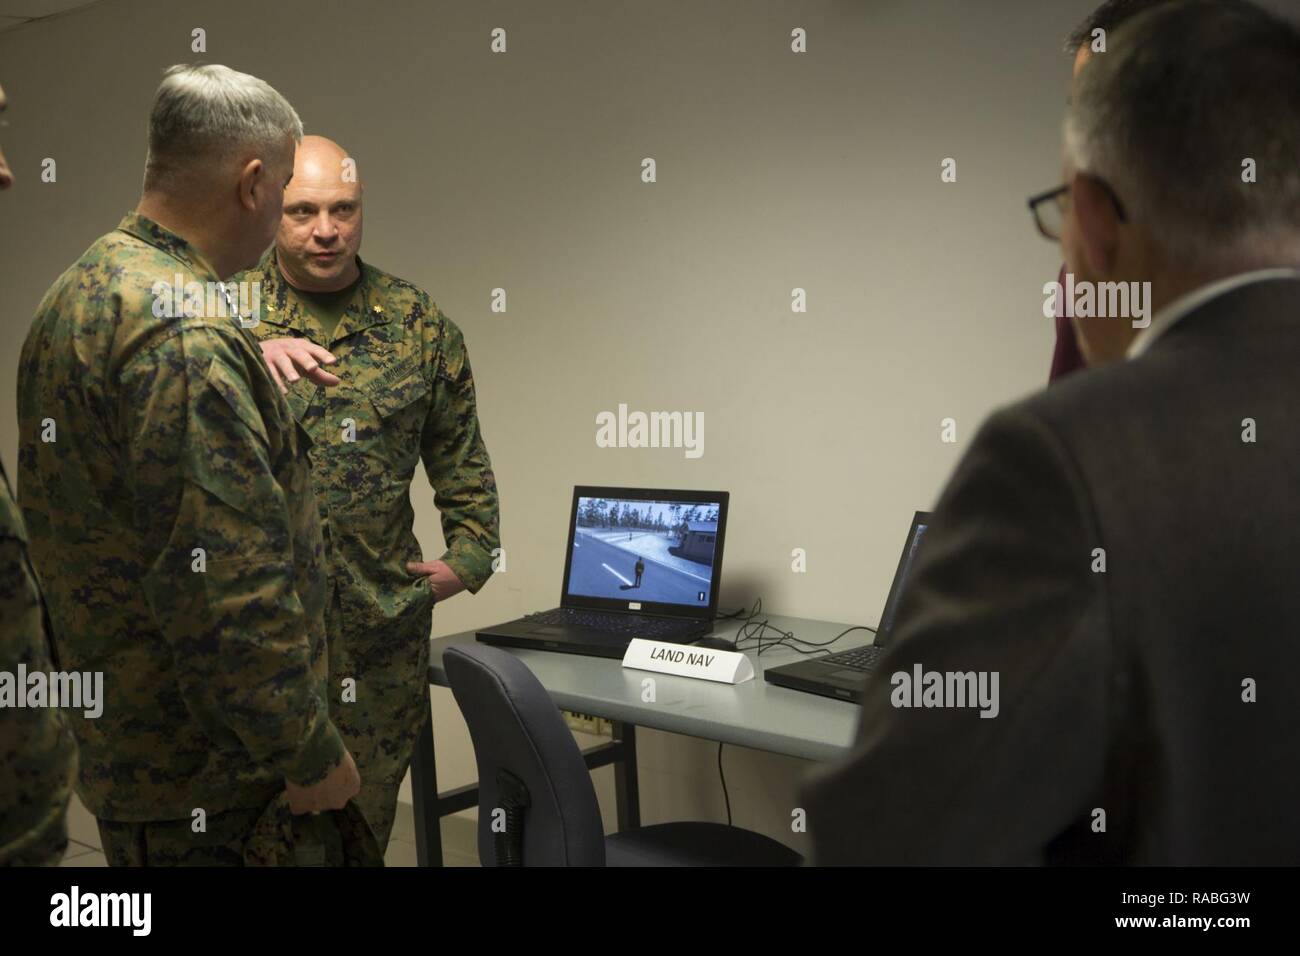 U.S. Marine Corps Maj. Craig L. Smith, right, modeling and simulation officer, II Marine Expeditionary Force (II MEF), briefs Gen. Glenn Walters the Assistant Commandant of the Marine Corps, on the usage of the II MEF Simulation Center during a visit to Camp Lejeune, N.C., Jan. 26, 2017. The purpose of the visit was to increase awareness and capabilities of ground simulation and simulator training systems in support of operational forces combat readiness. Stock Photo